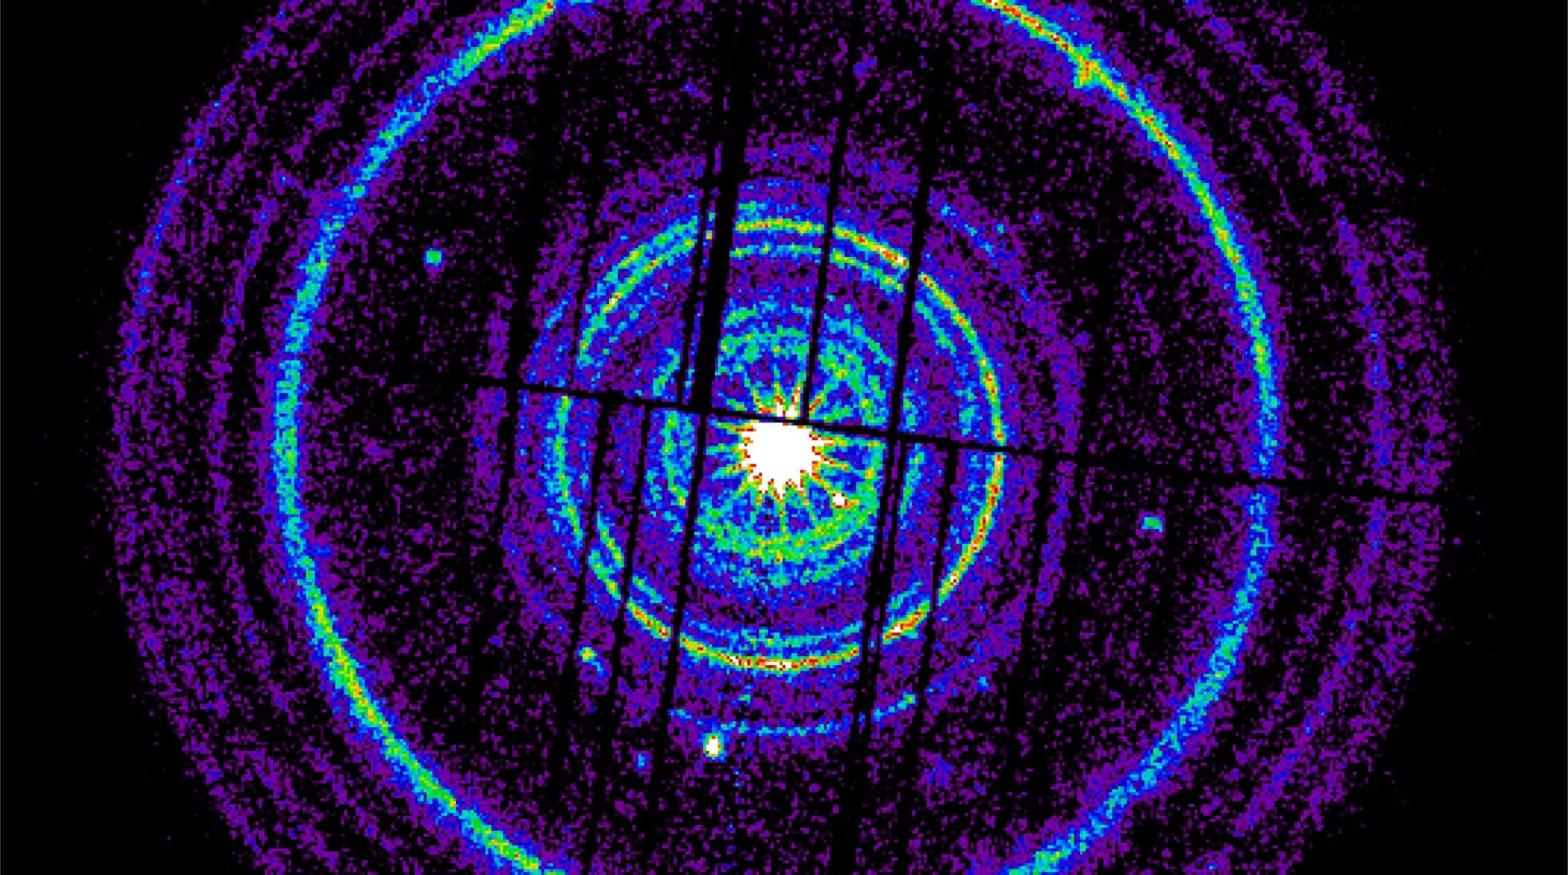 The gamma ray burst as seen by the European Space Agency's XMM-Newton observatory. (Image: ESA/XMM - Newton/M. Rigoselli (INAF))